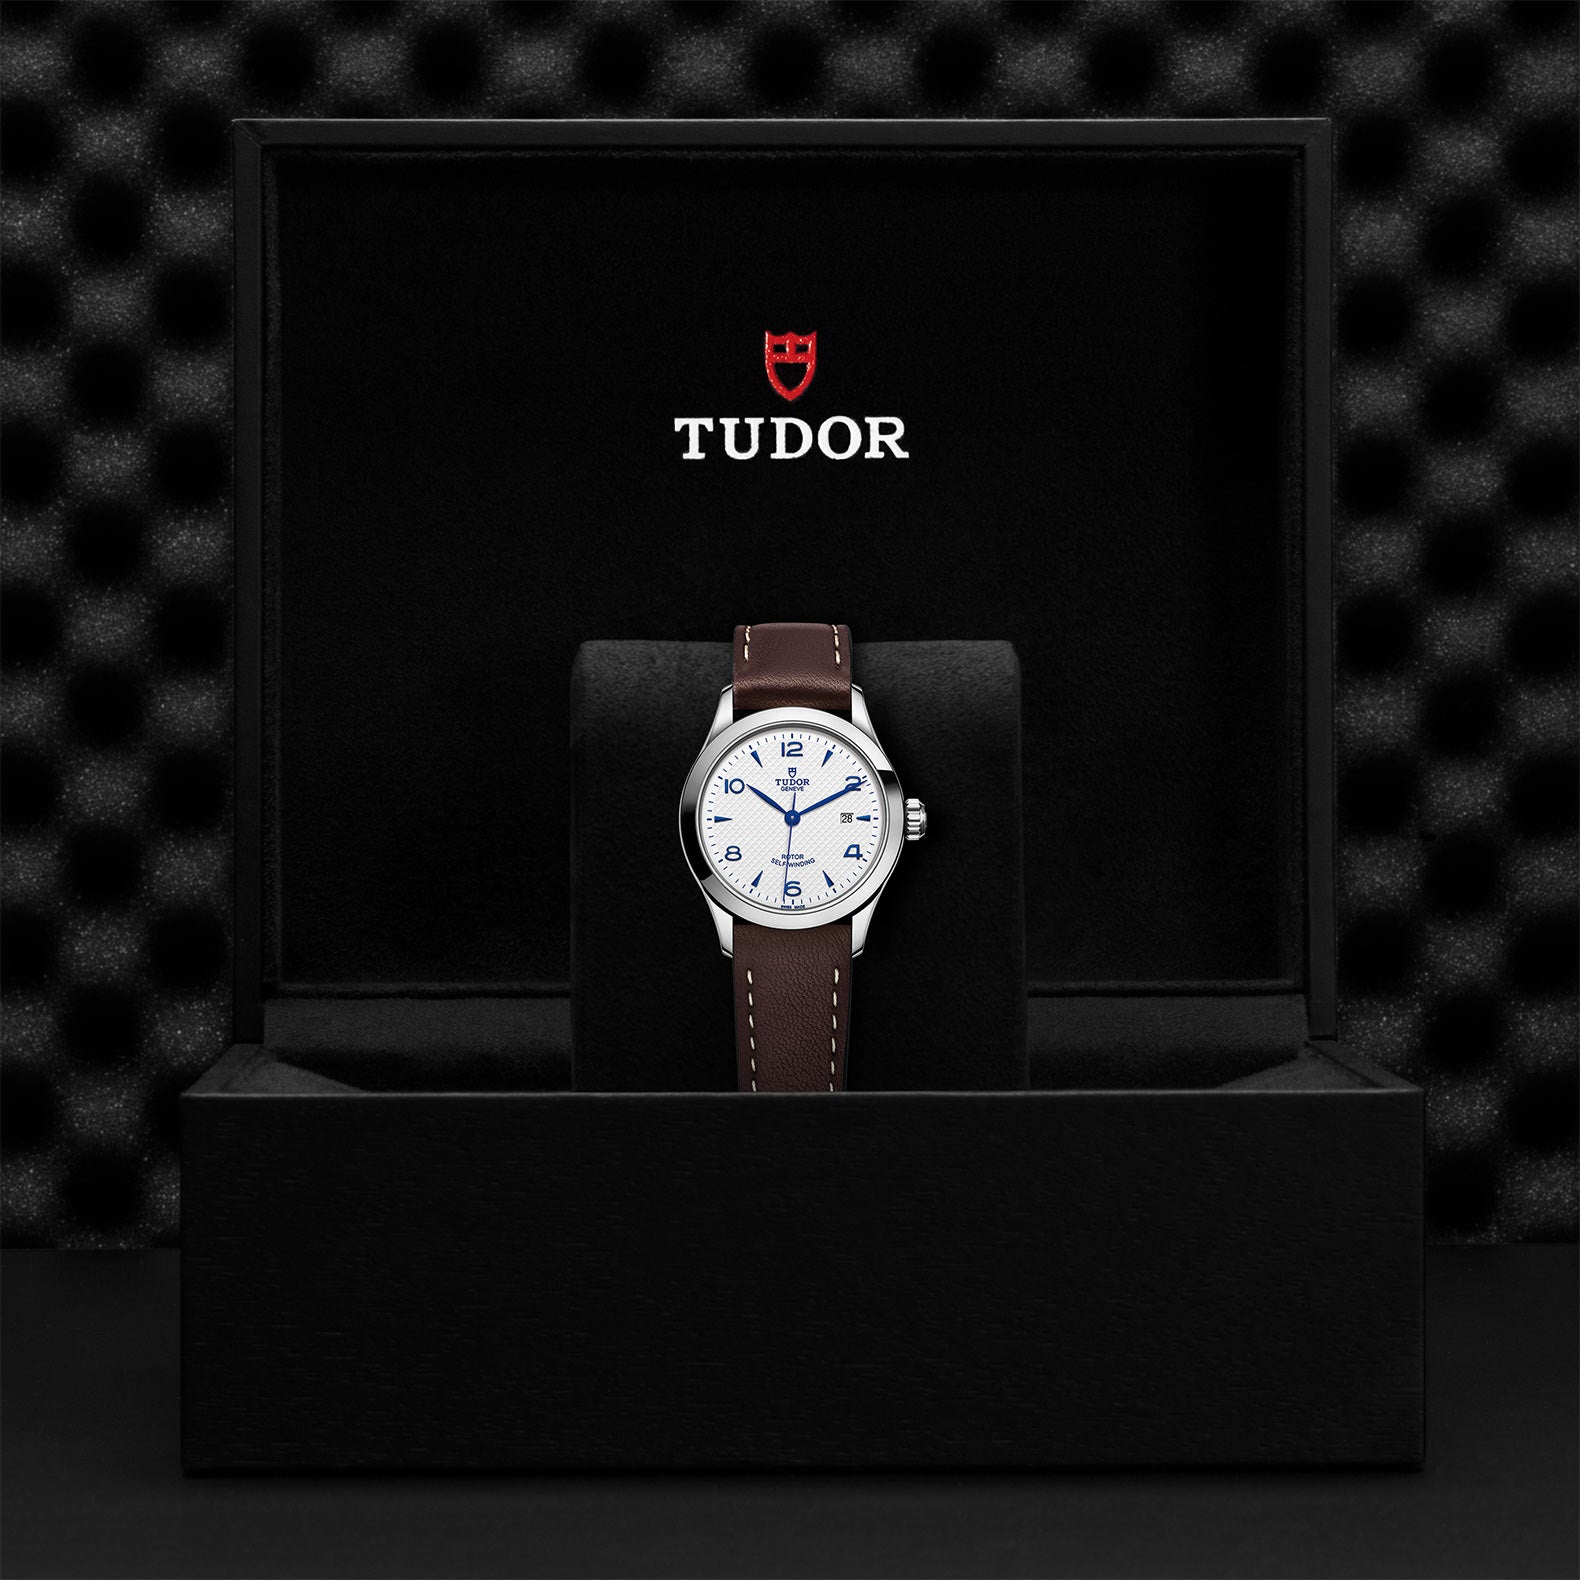 TUDOR Watch TUDOR 1926 28mm Steel Case, Opaline and Blue Dial, Leather Strap (M91350-0010)